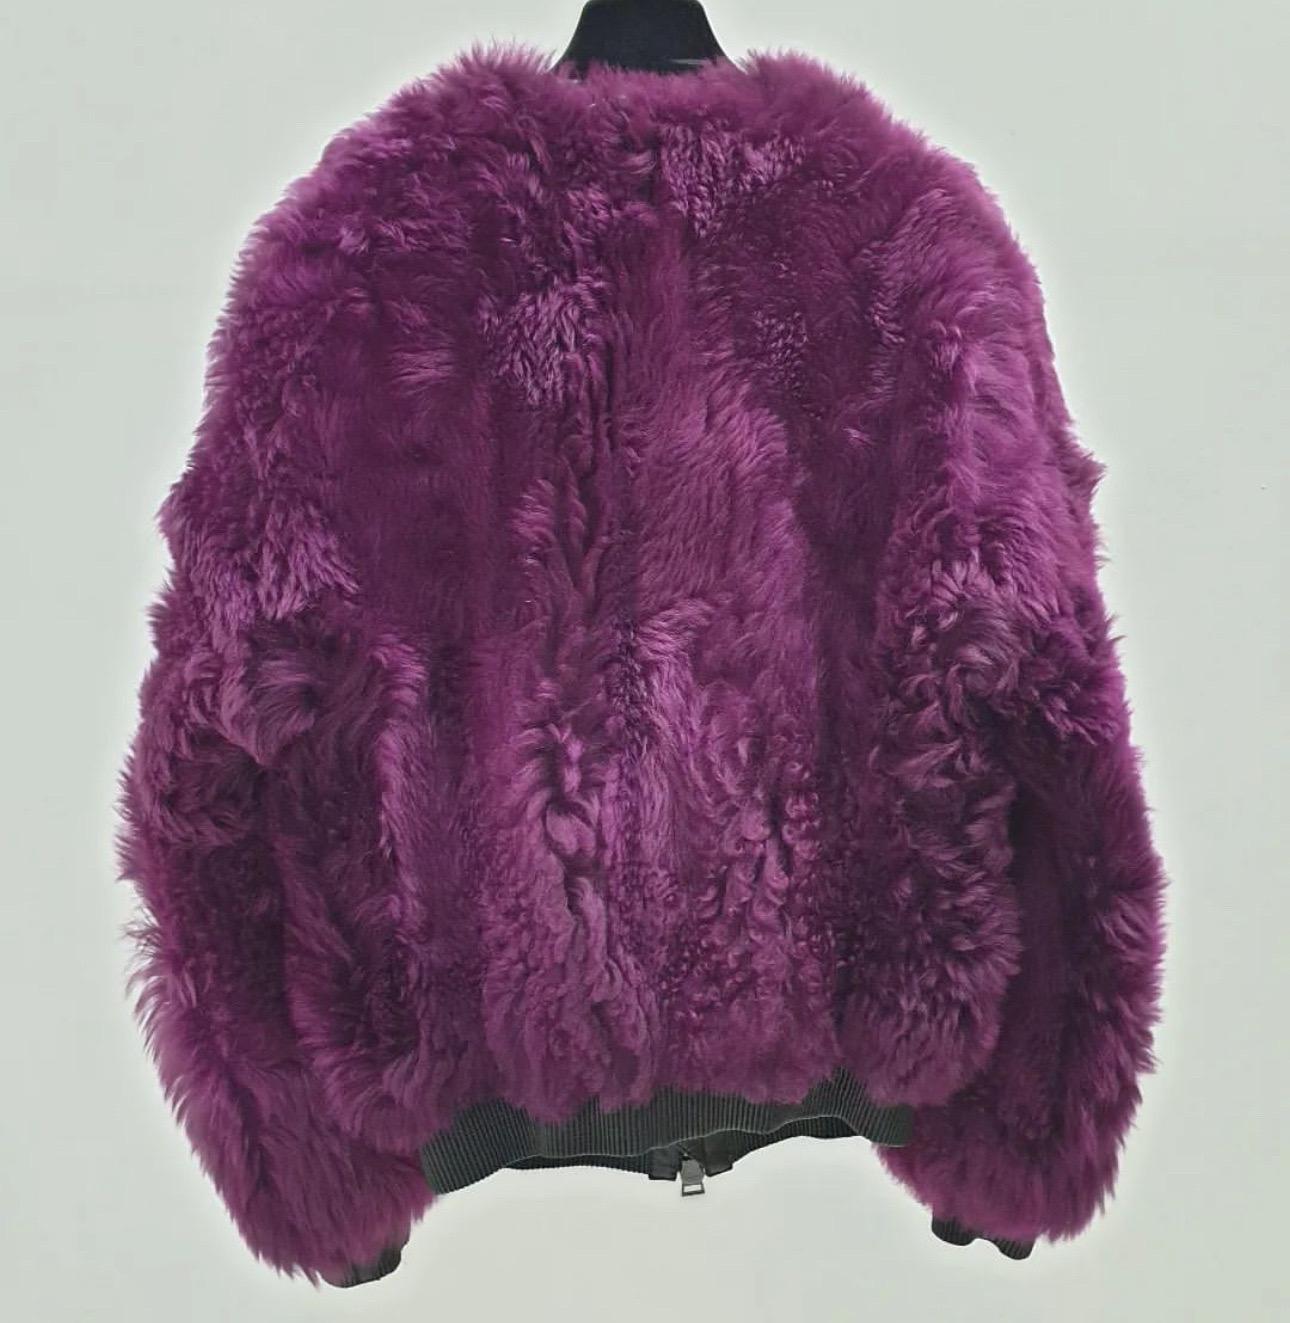 TOM FORD Lamb Fur Chubby Bomber Jacket In Good Condition For Sale In Krakow, PL